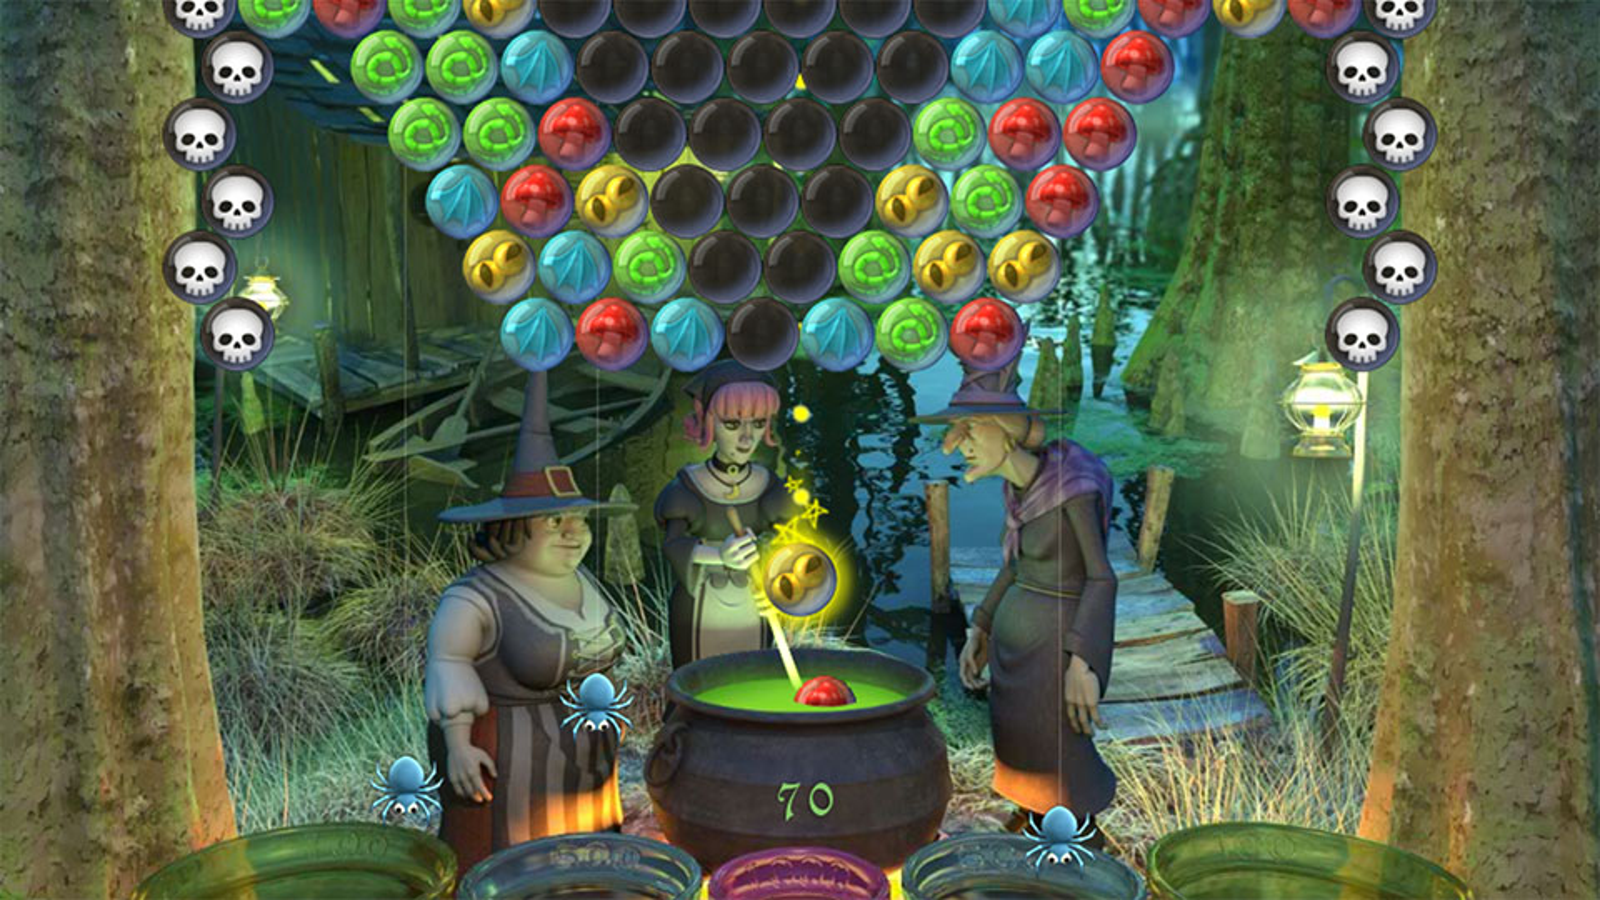 bubblewitch